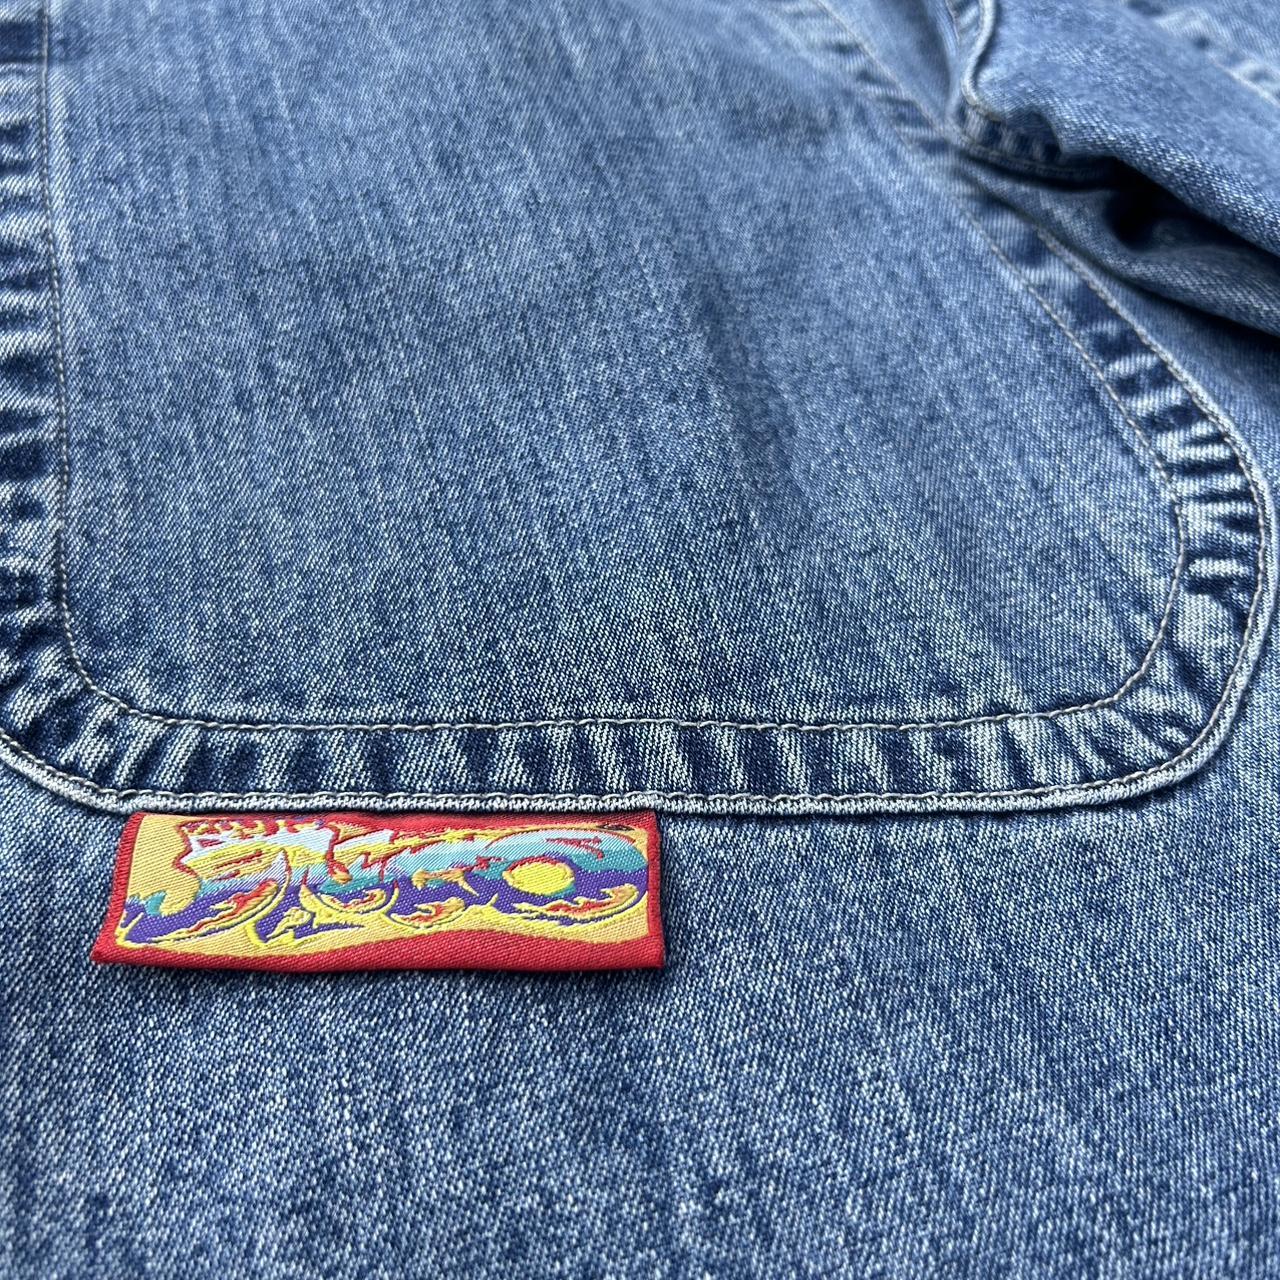 Jnco Jeans Wizard Edition from 90s super sick... - Depop